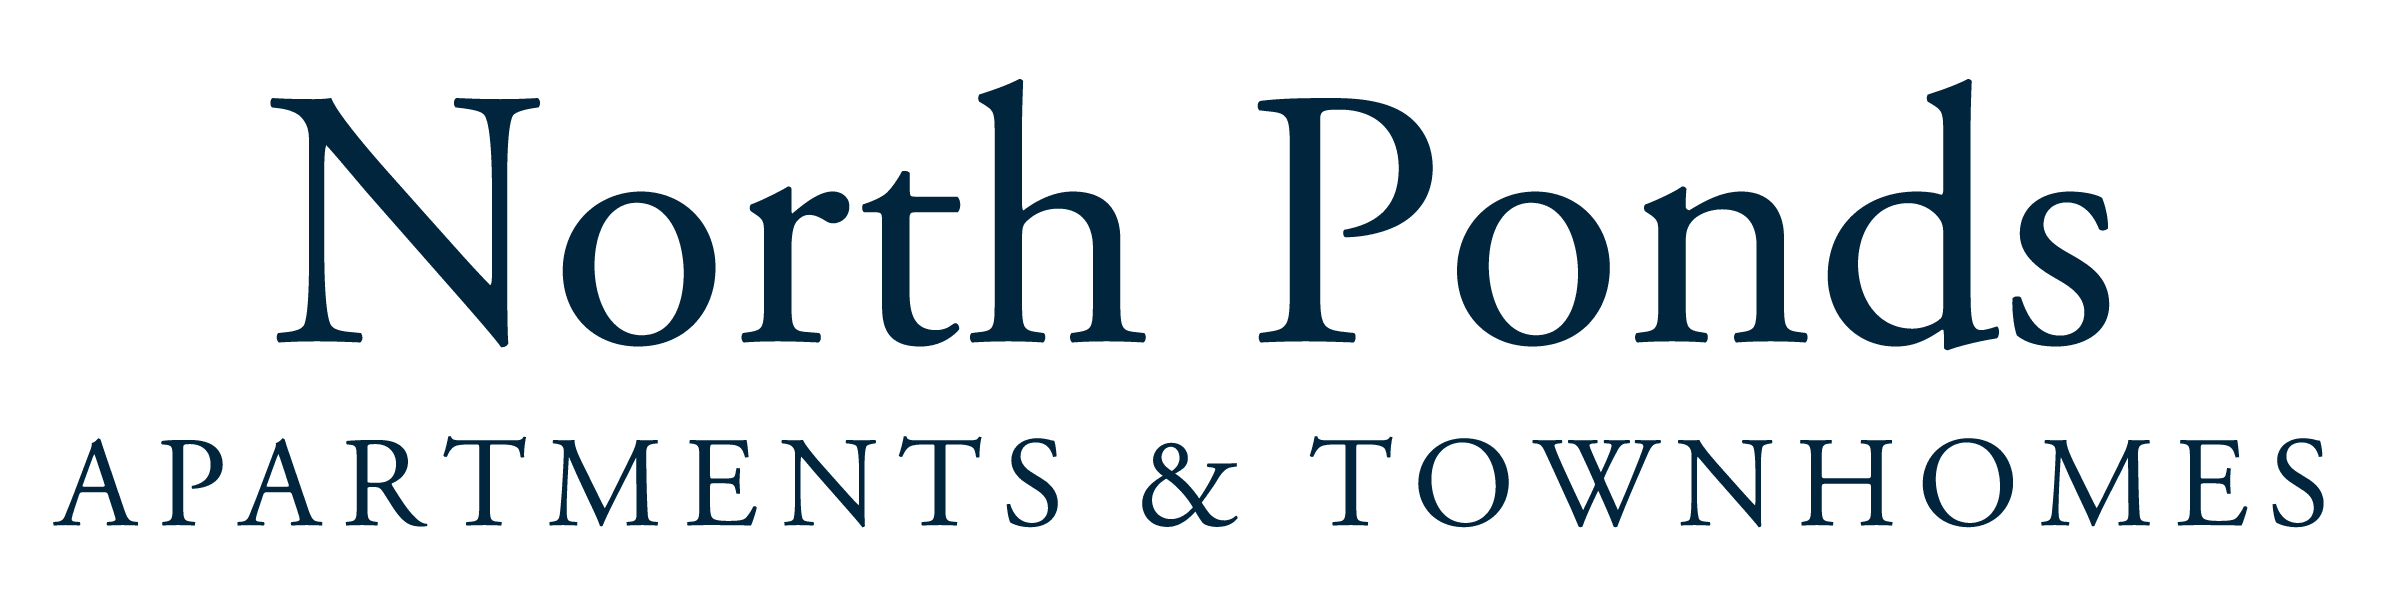 North Ponds Apartments & Townhomes